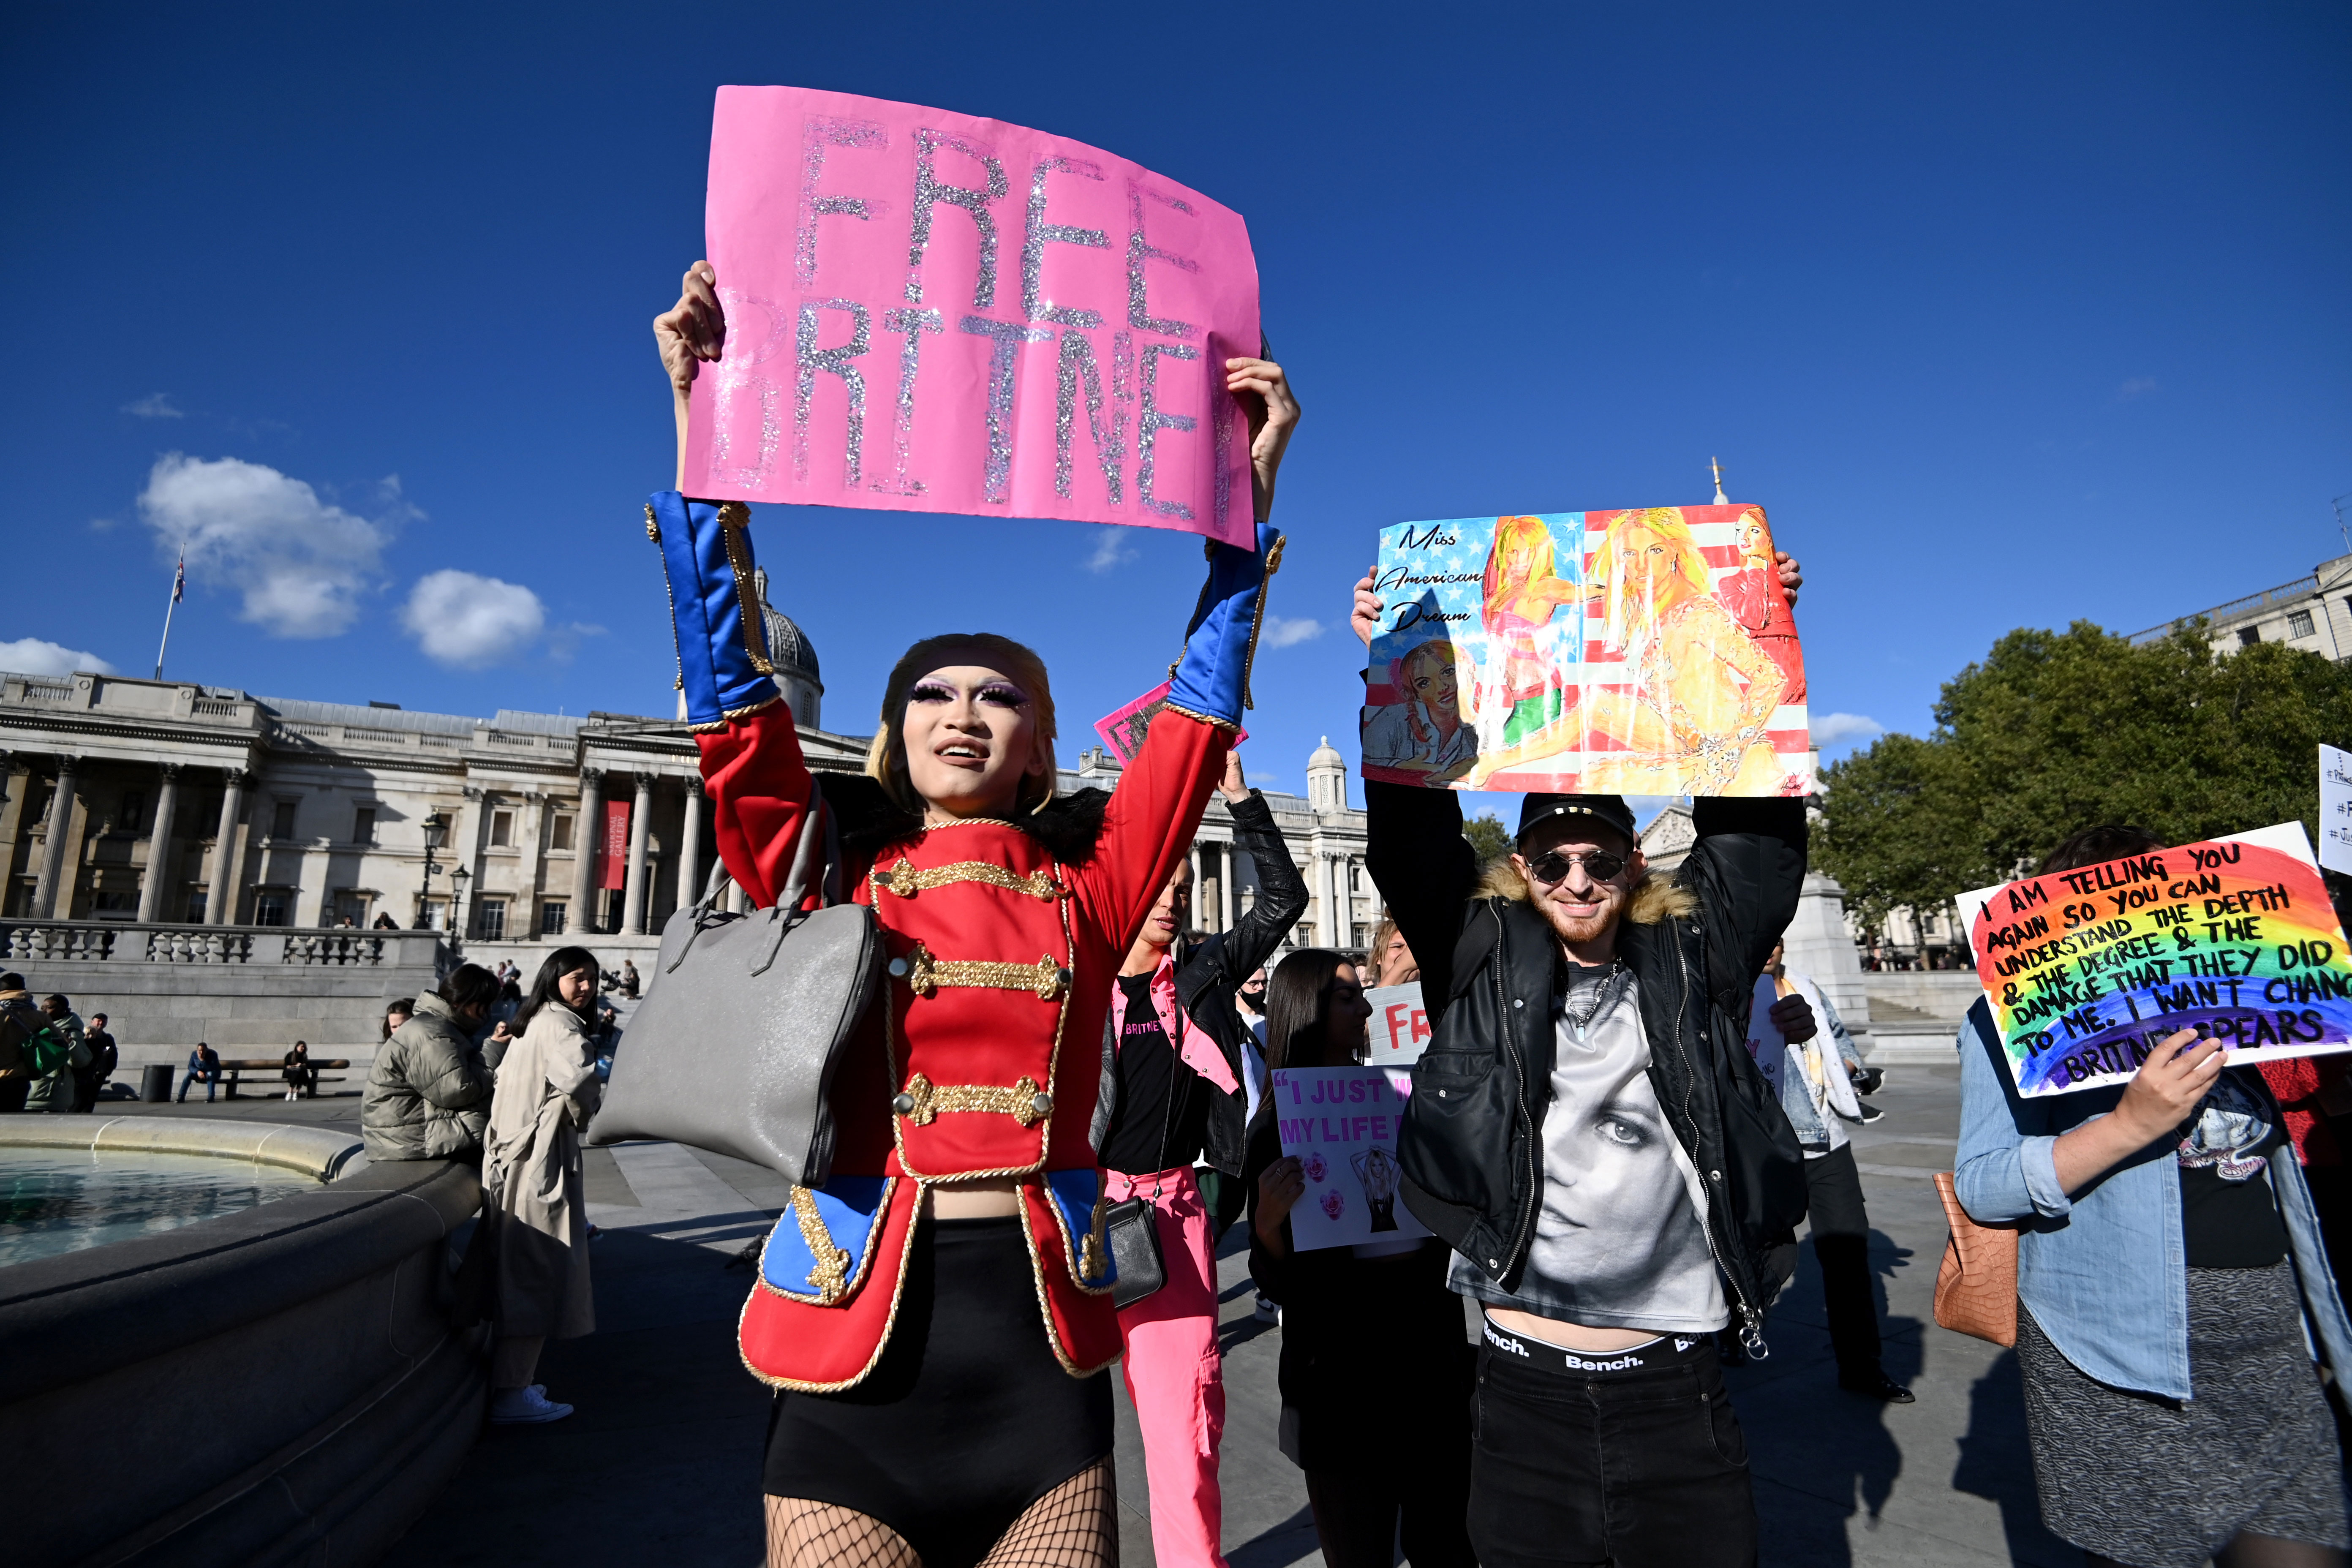 Britney Spears supporters attend a rally in London on September 29.